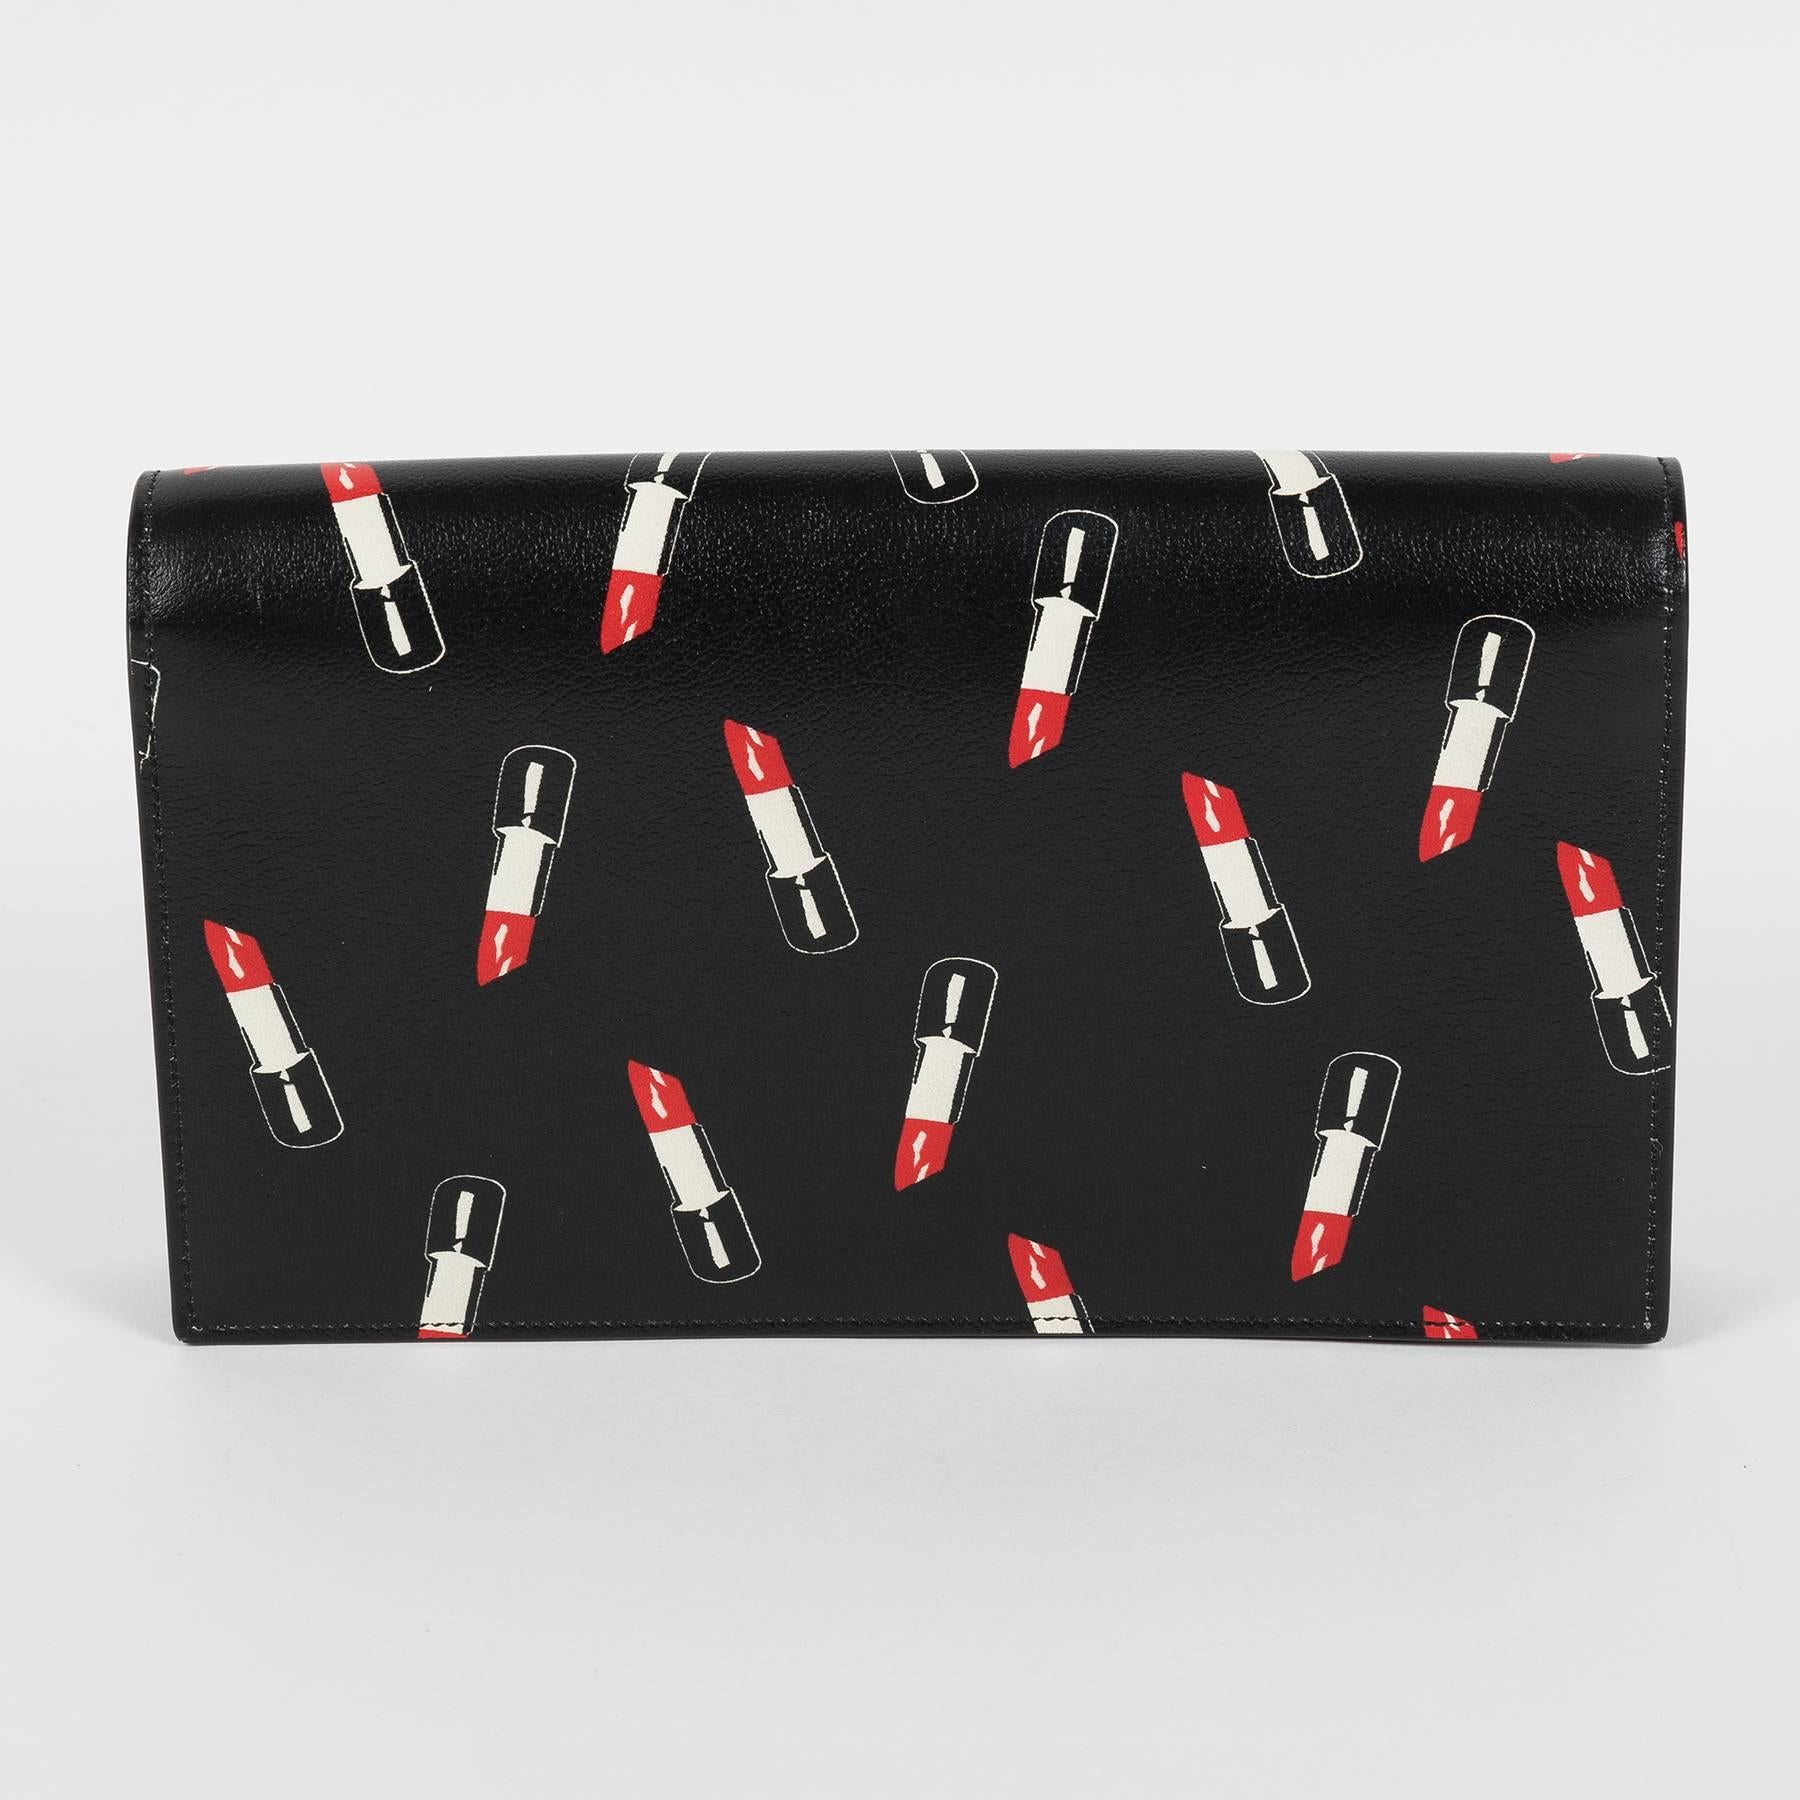 Yves Saint Laurent clutch. 
Collectible item with lipstick print.
With tag and dustbag.
New, never worn.
